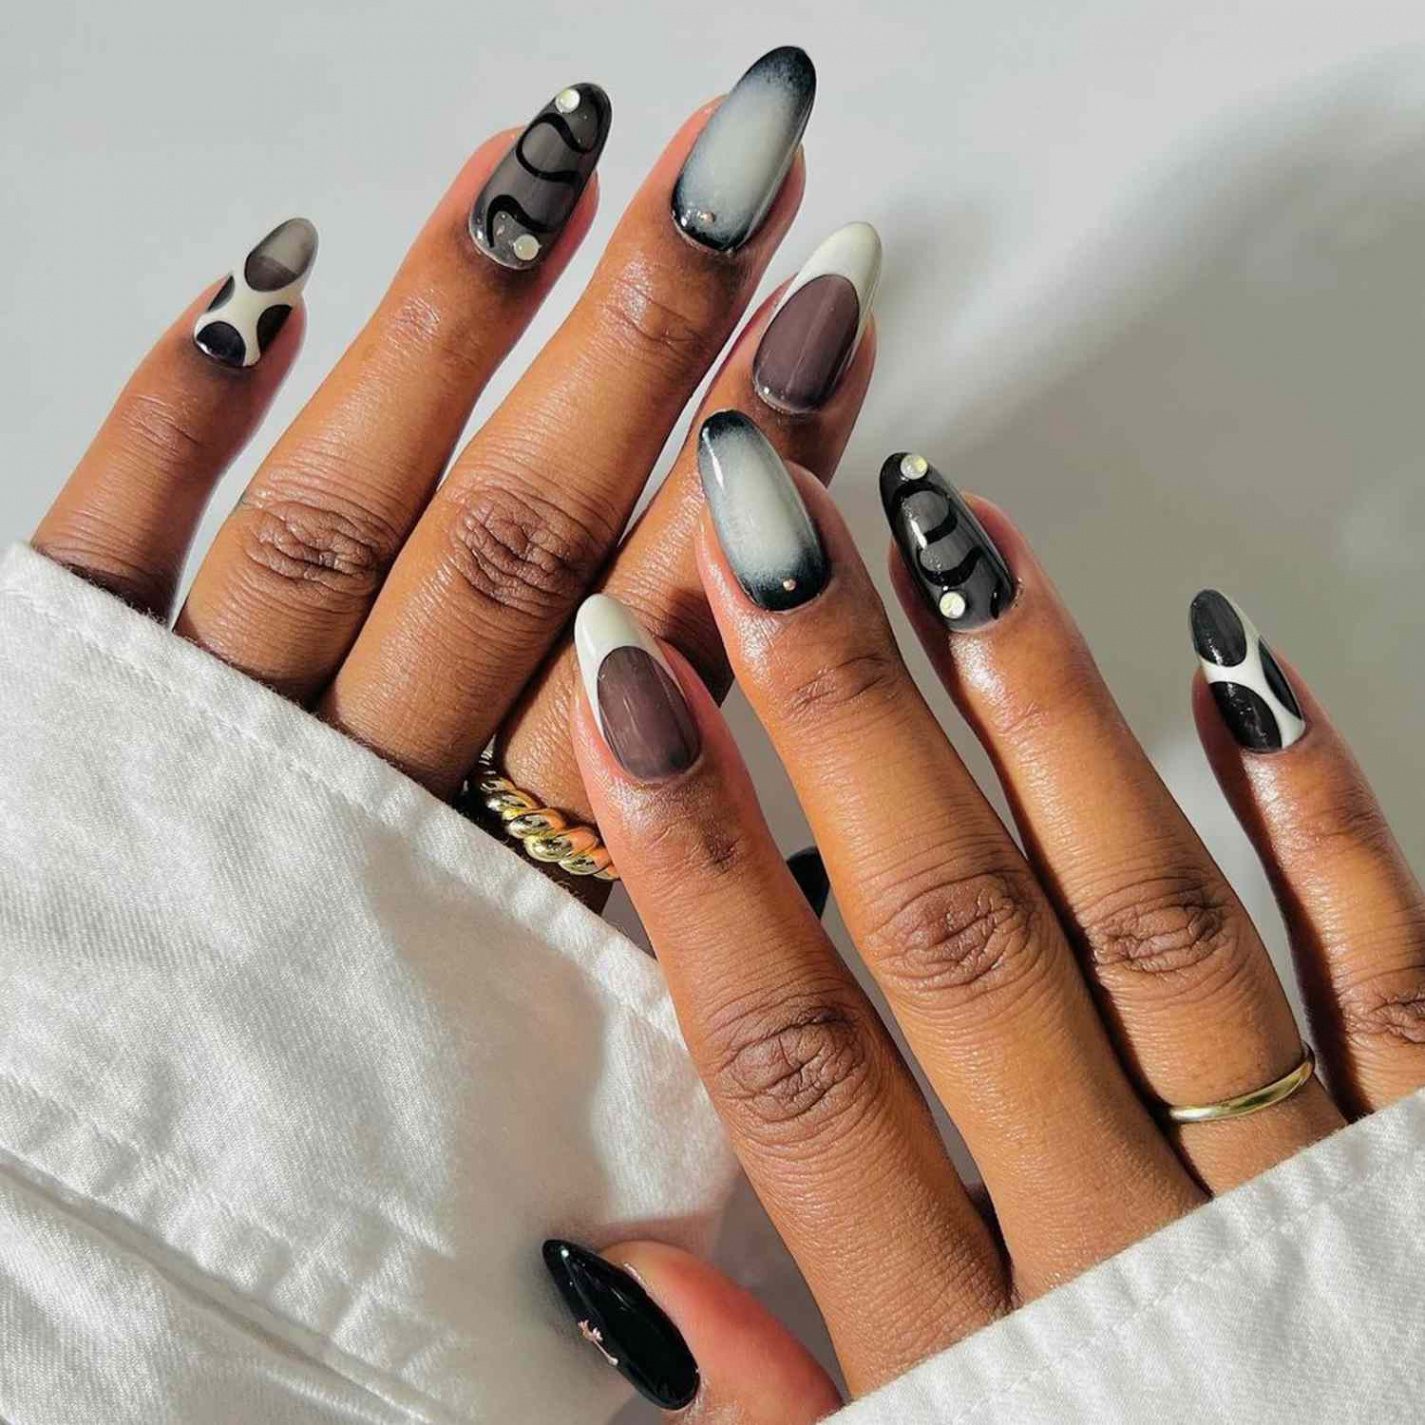 October Nail Ideas for a Moody, Autumnal Manicure